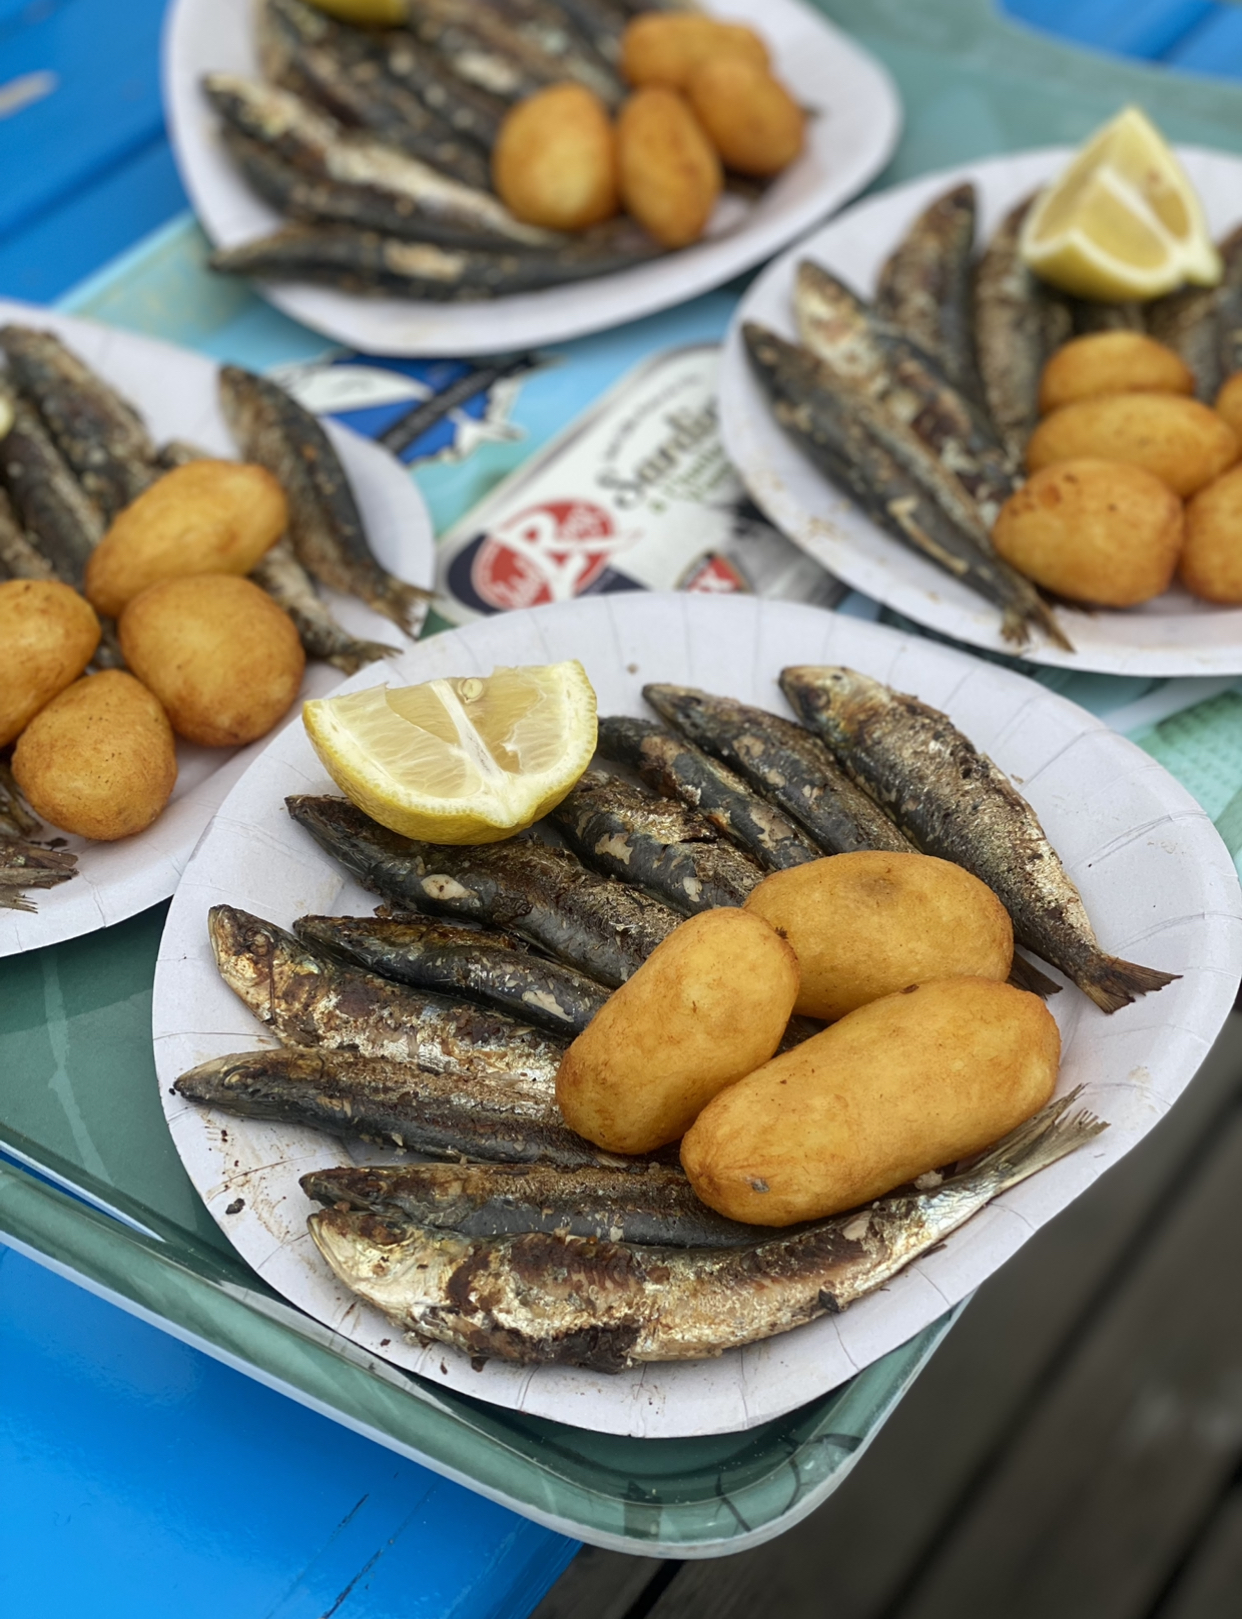 Plates of sardines and potatoes